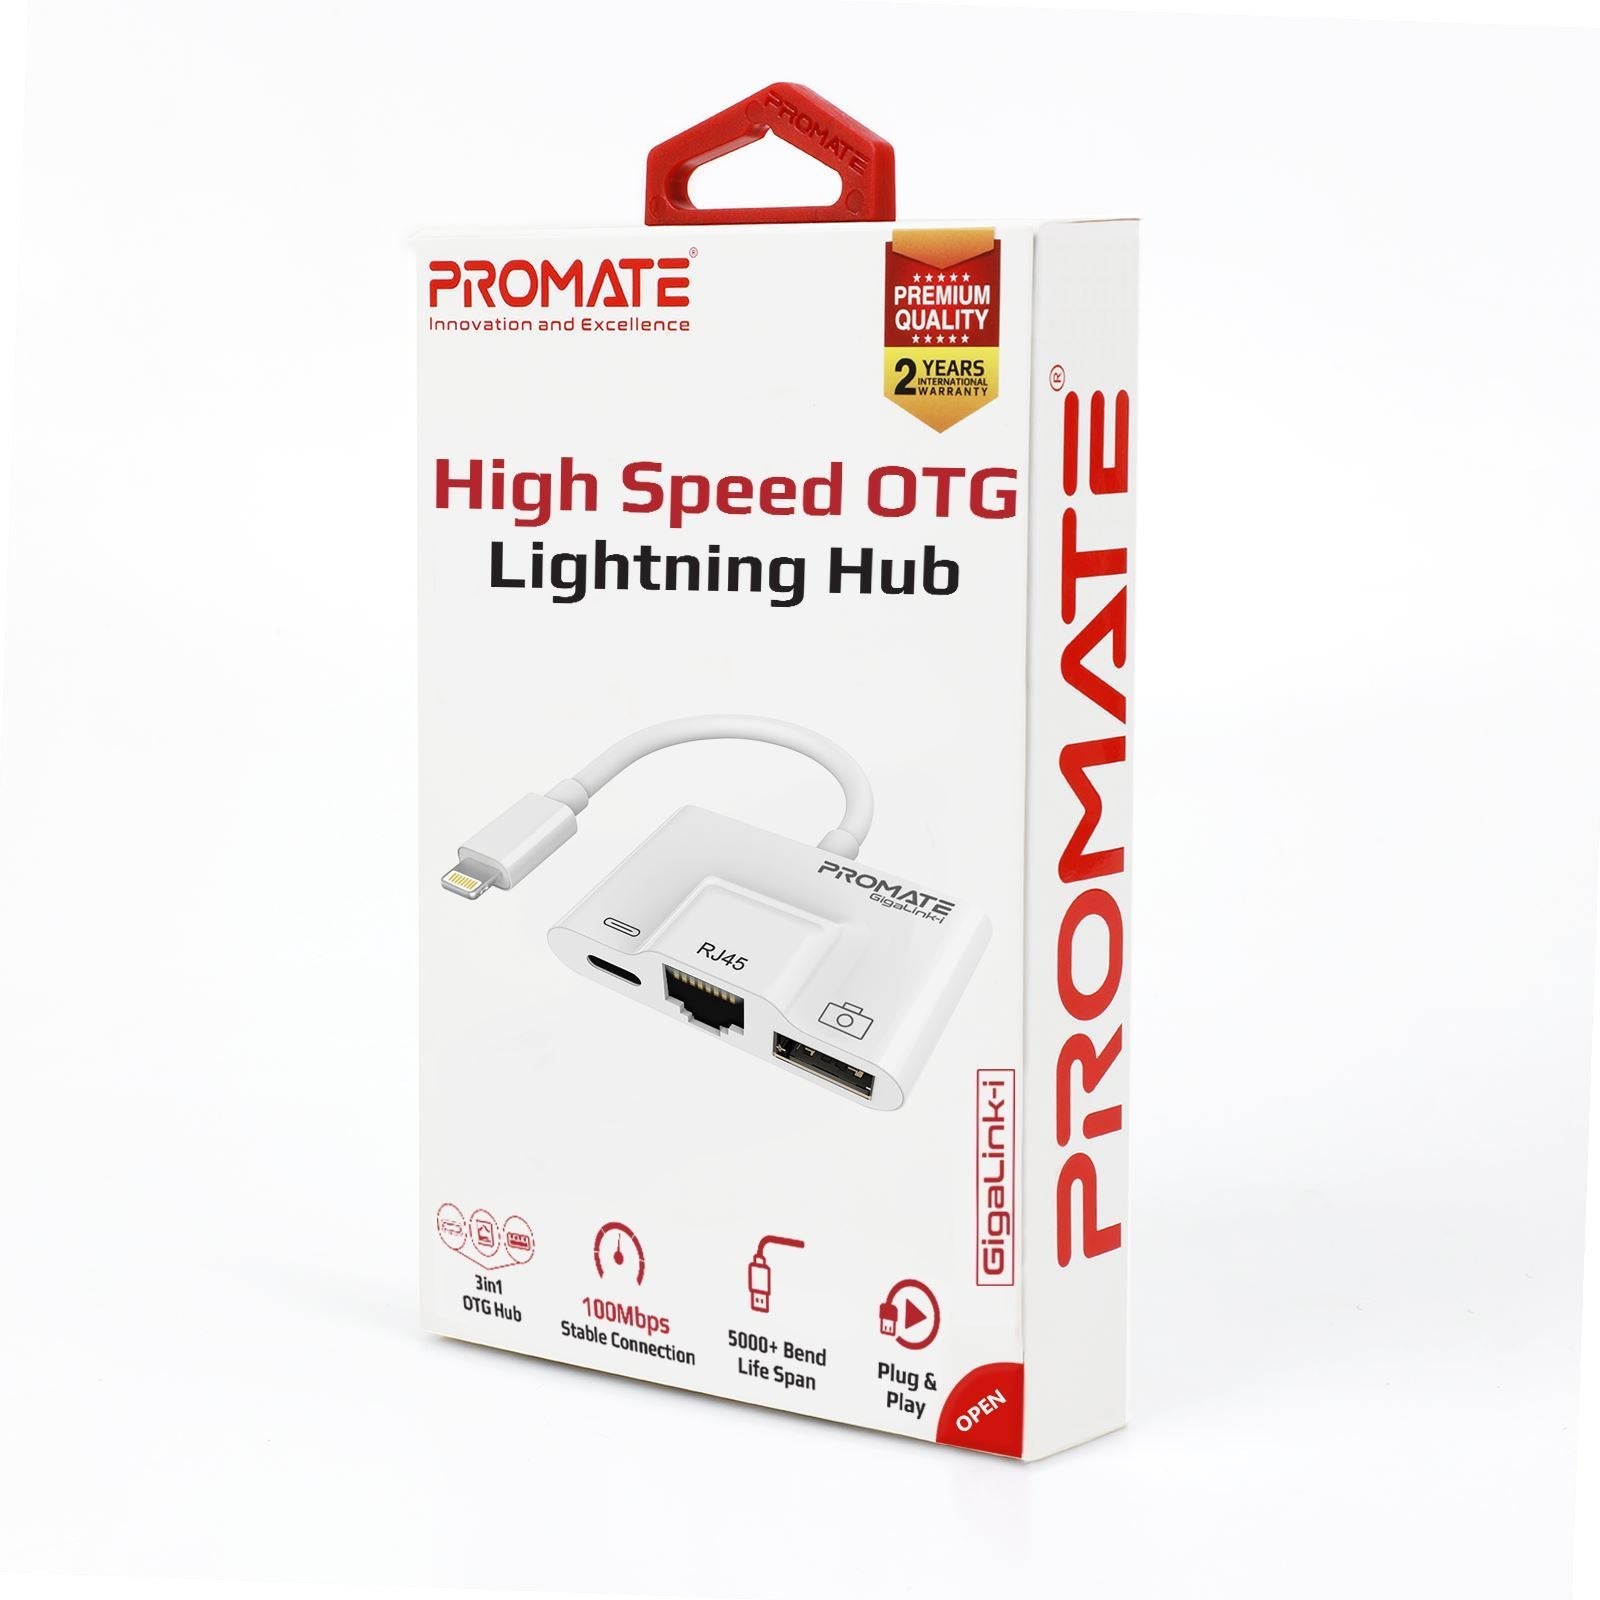 PROMATE_3-in-1_OTG_Lightning_Hub._Input_RJ45,_USB_3.0_Port,_Lightning_Port._Output_Lightning_Connector._Ethernet_Bandwidth_100Mbps_and_Downwards_Compatible._Compact_July_Sale_-_20%_OFF 1324